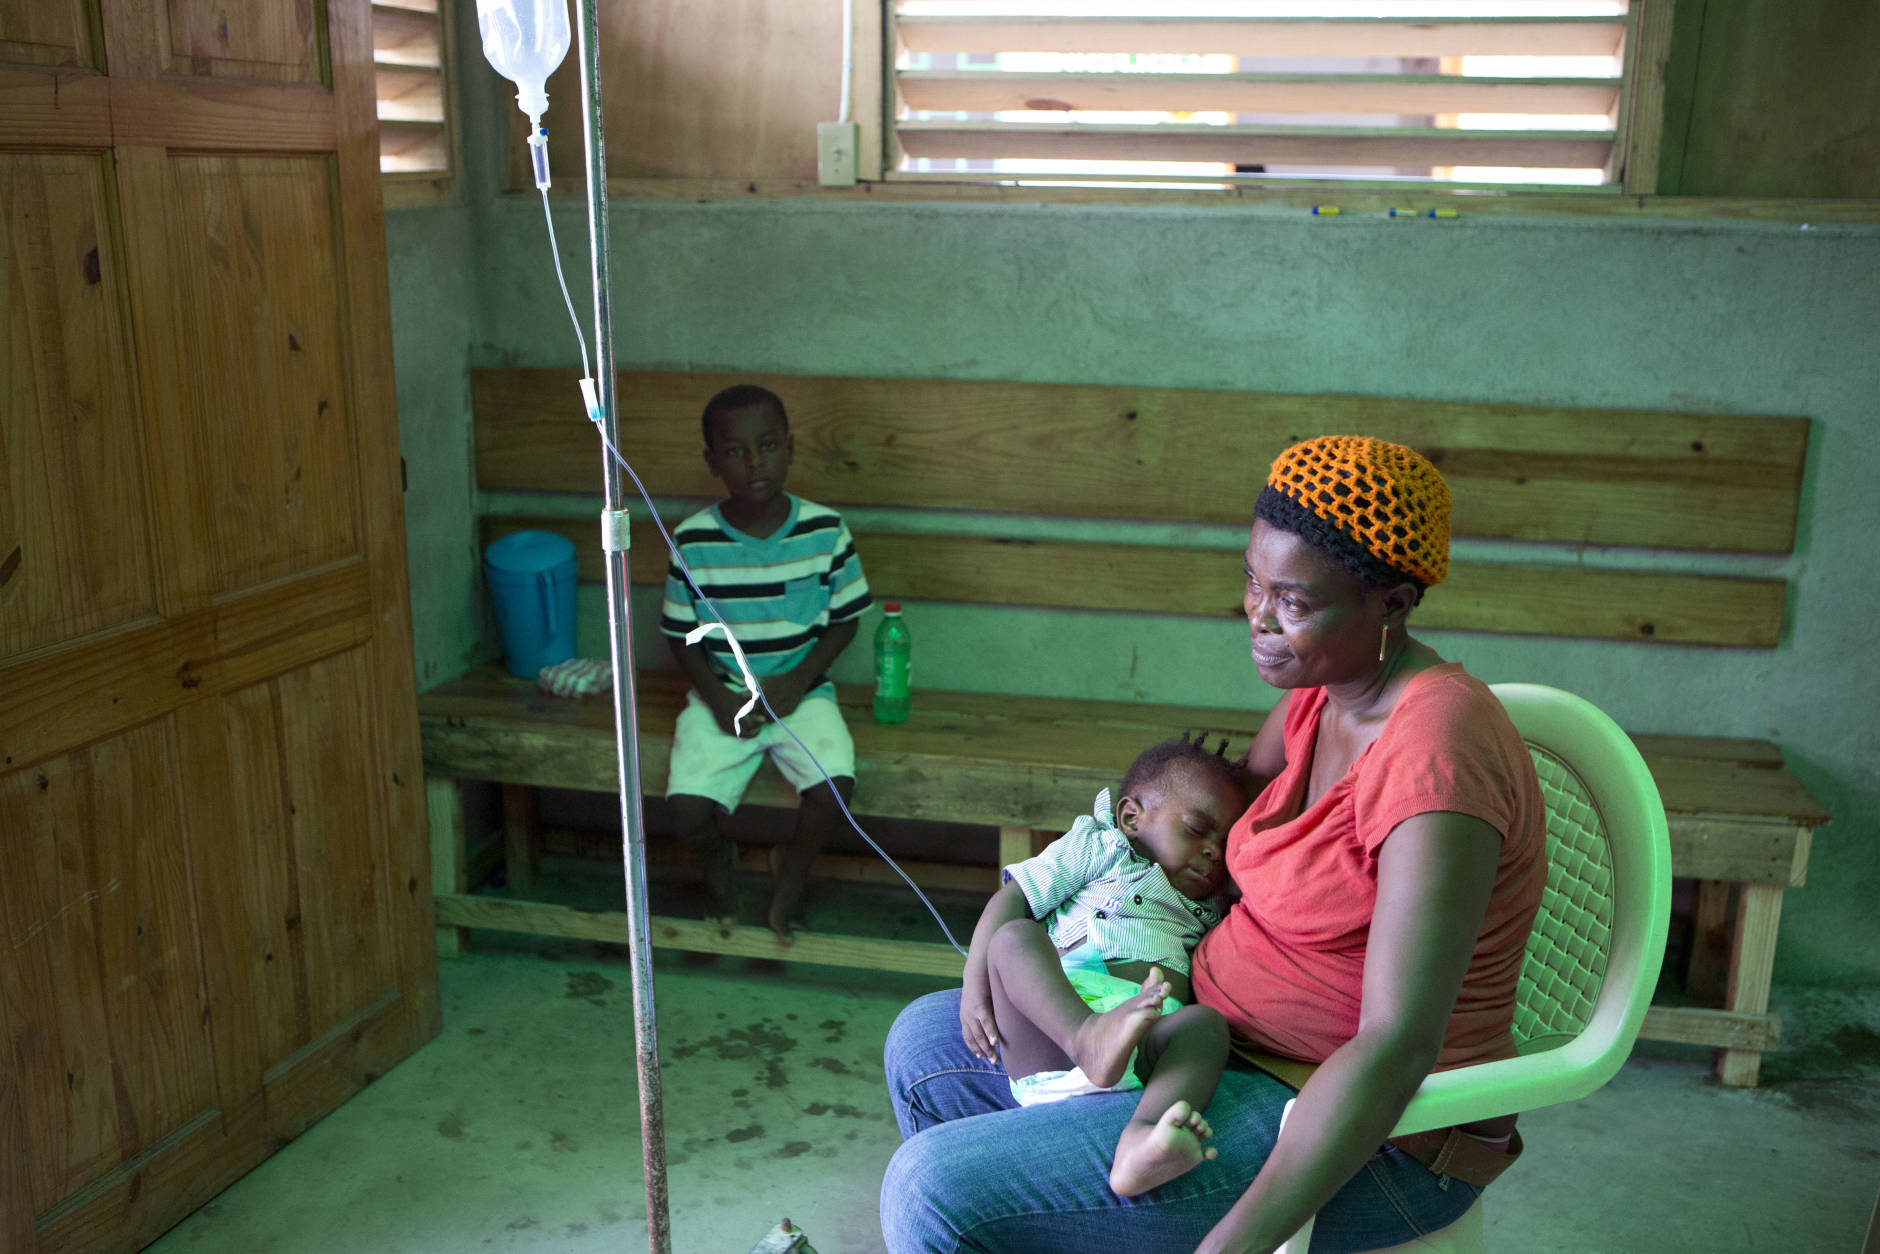 Denise Jabon holds her 7-month-old son Yamson Casi, as he rests hooked up to an IV in a cholera ward in Les Cayes Haiti, Tuesday, Oct. 11, 2016. Health authorities have warned that Hurricane Matthew has created conditions that are likely to cause an increase in the deadly waterborne cholera virus.(AP Photo/Rebecca Blackwell)